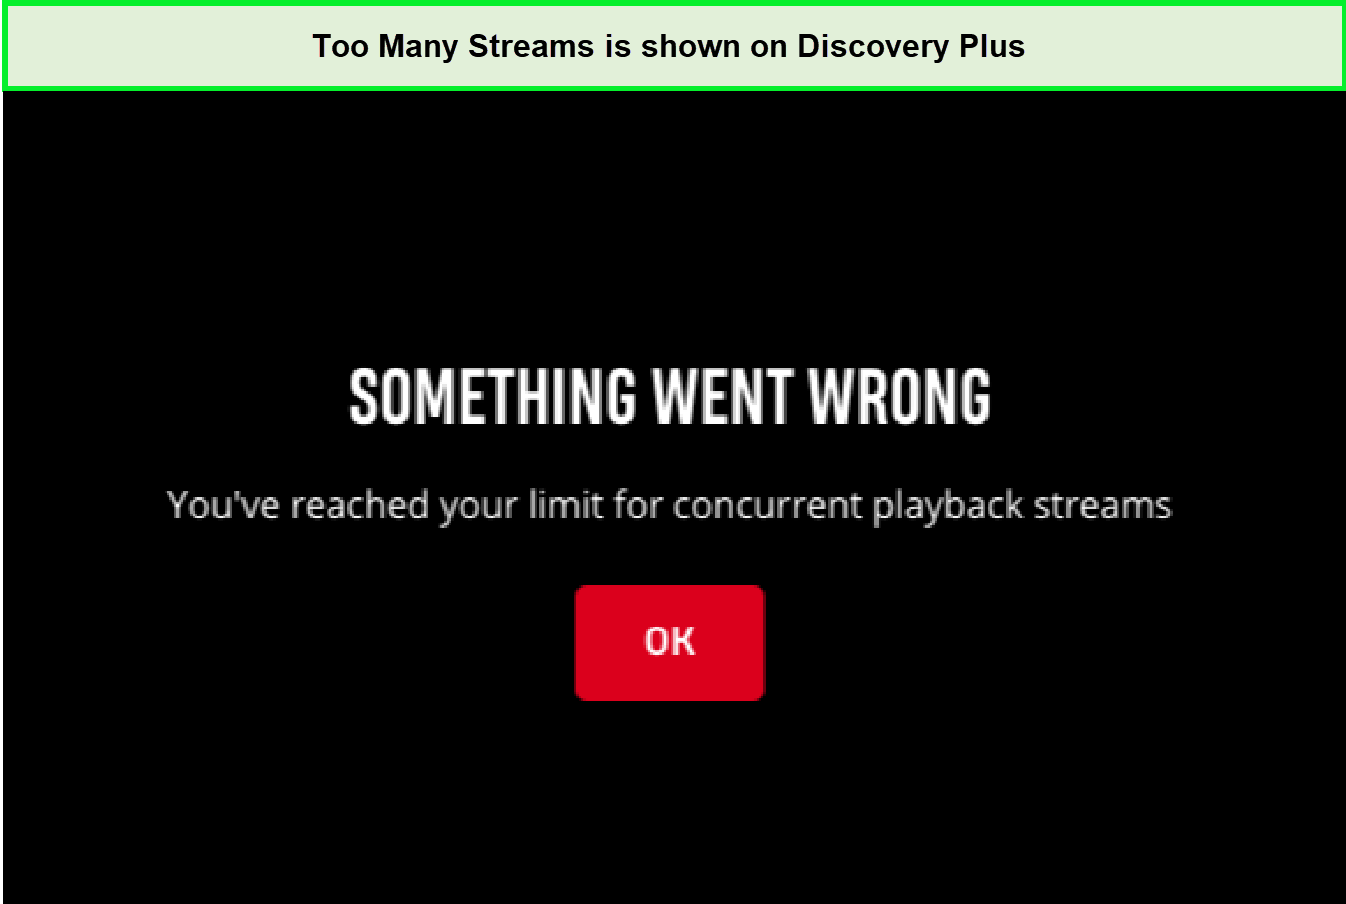 discovery-plus-too-many-streams-error-in-UAE